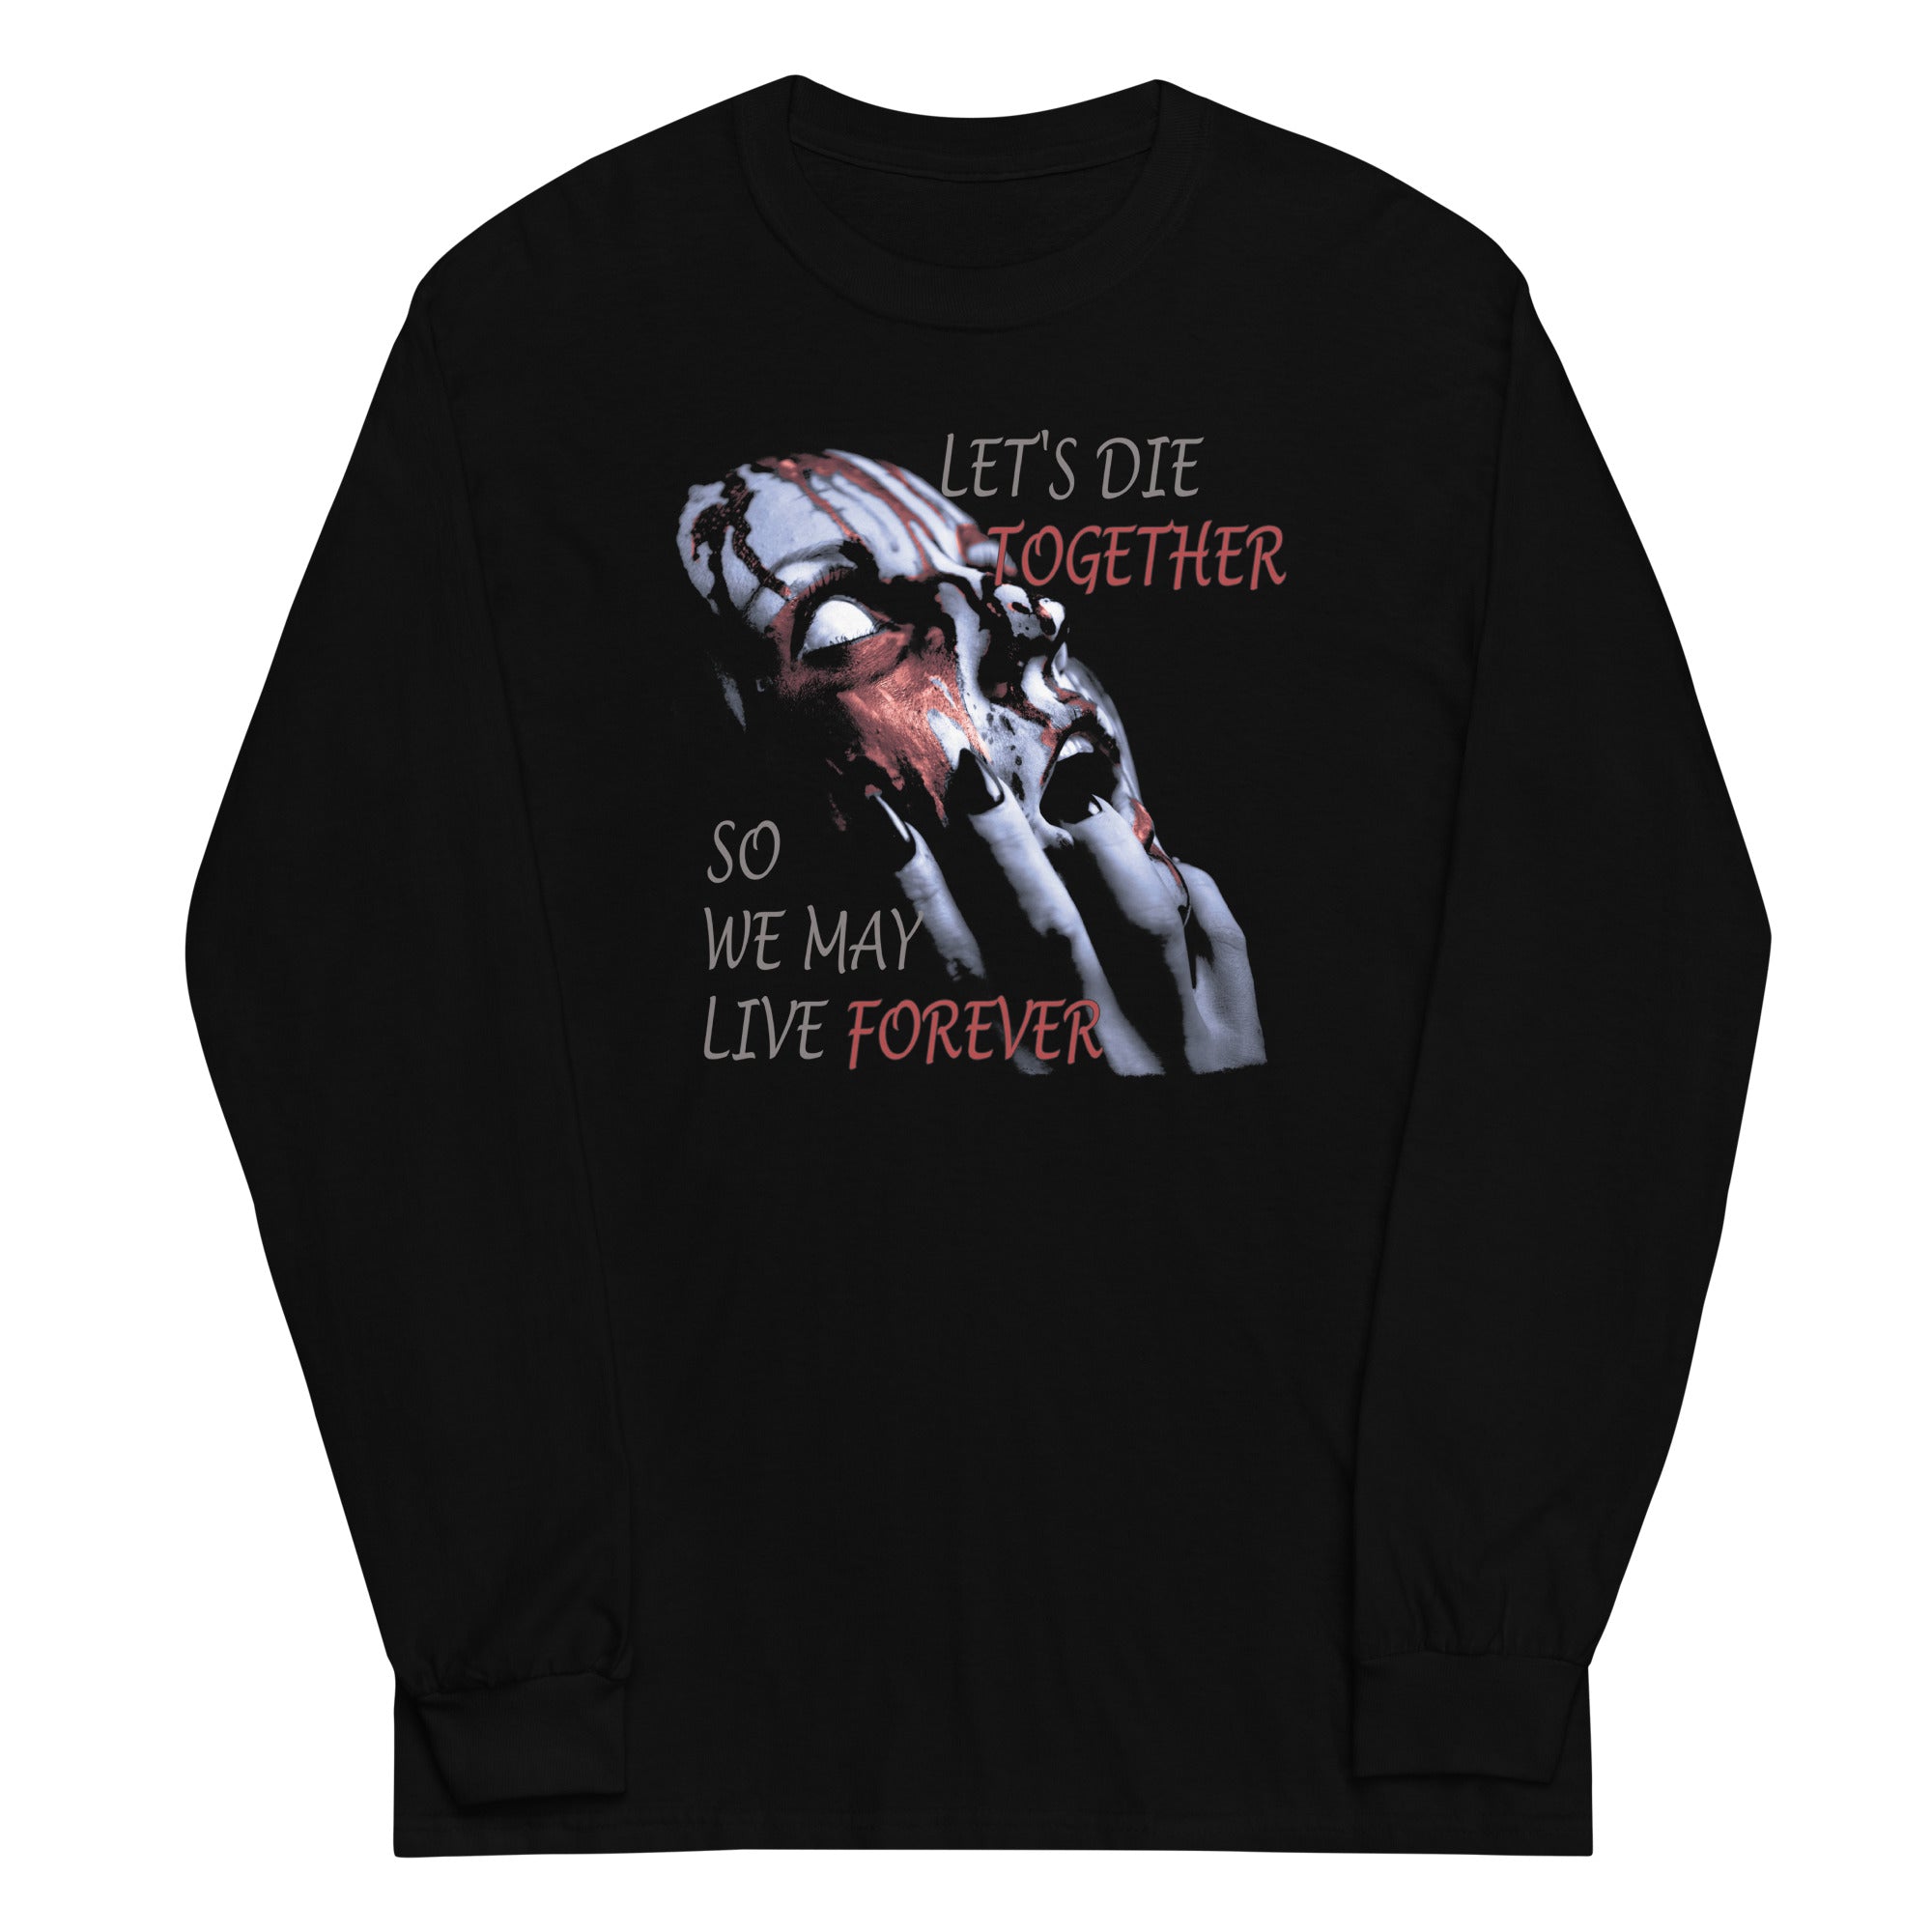 Together Forever Horror Gothic Fashion Long Sleeve Shirt